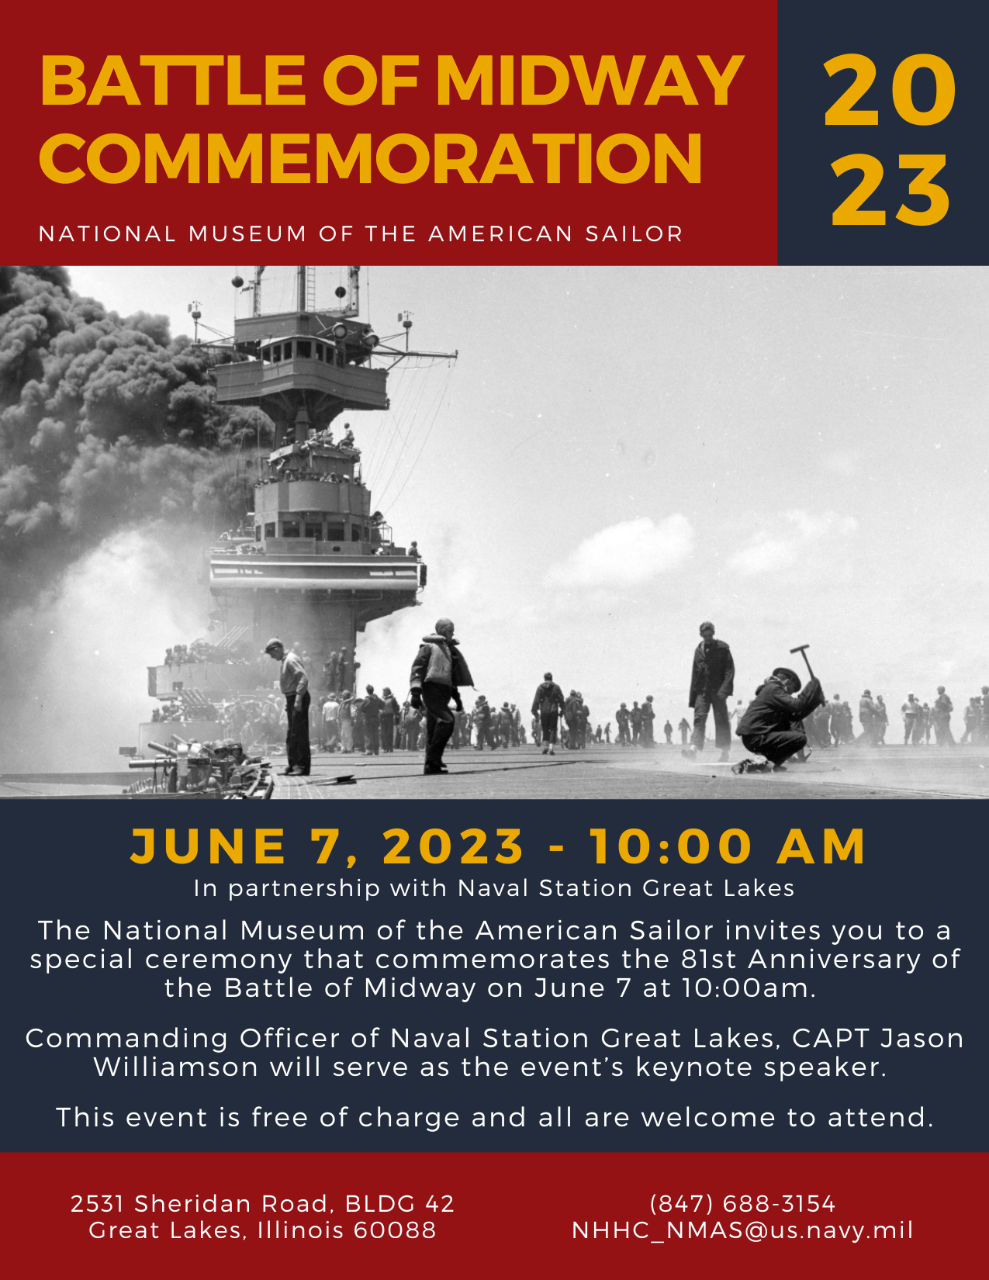 Flier for the 81st Anniversary of the Battle of Midway